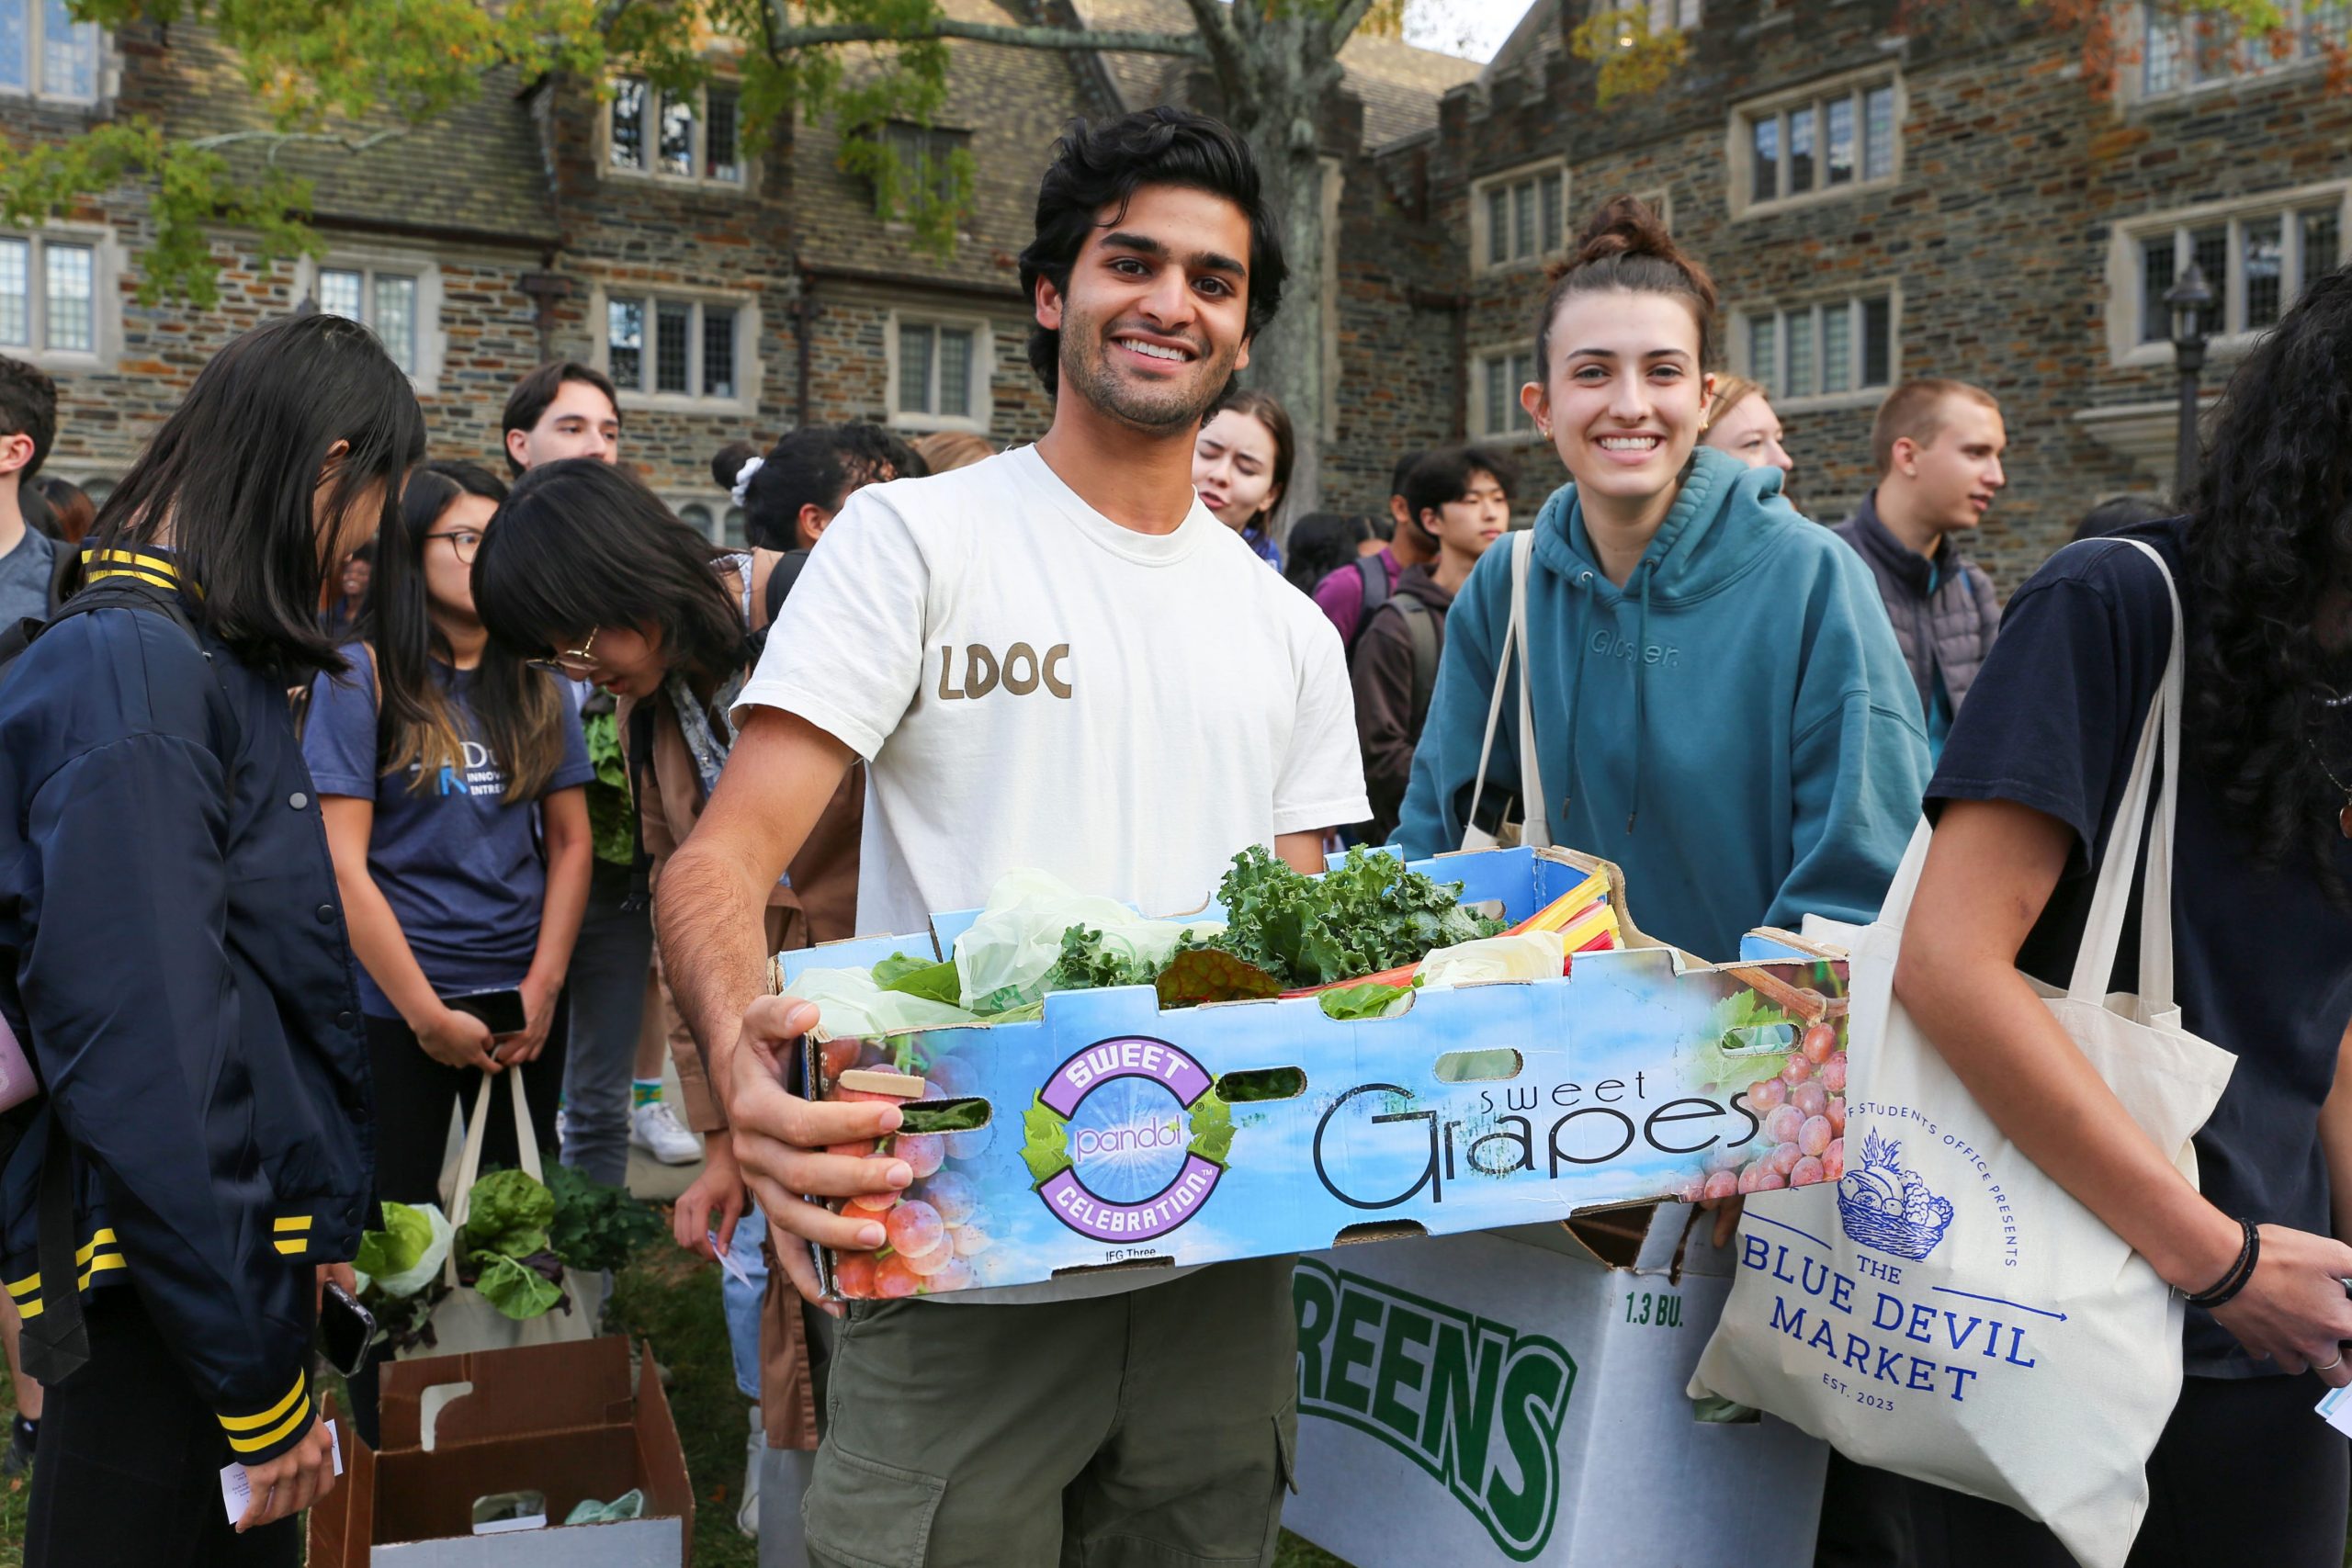 Two Duke students pose for the camera, holding boxes of fresh vegetables